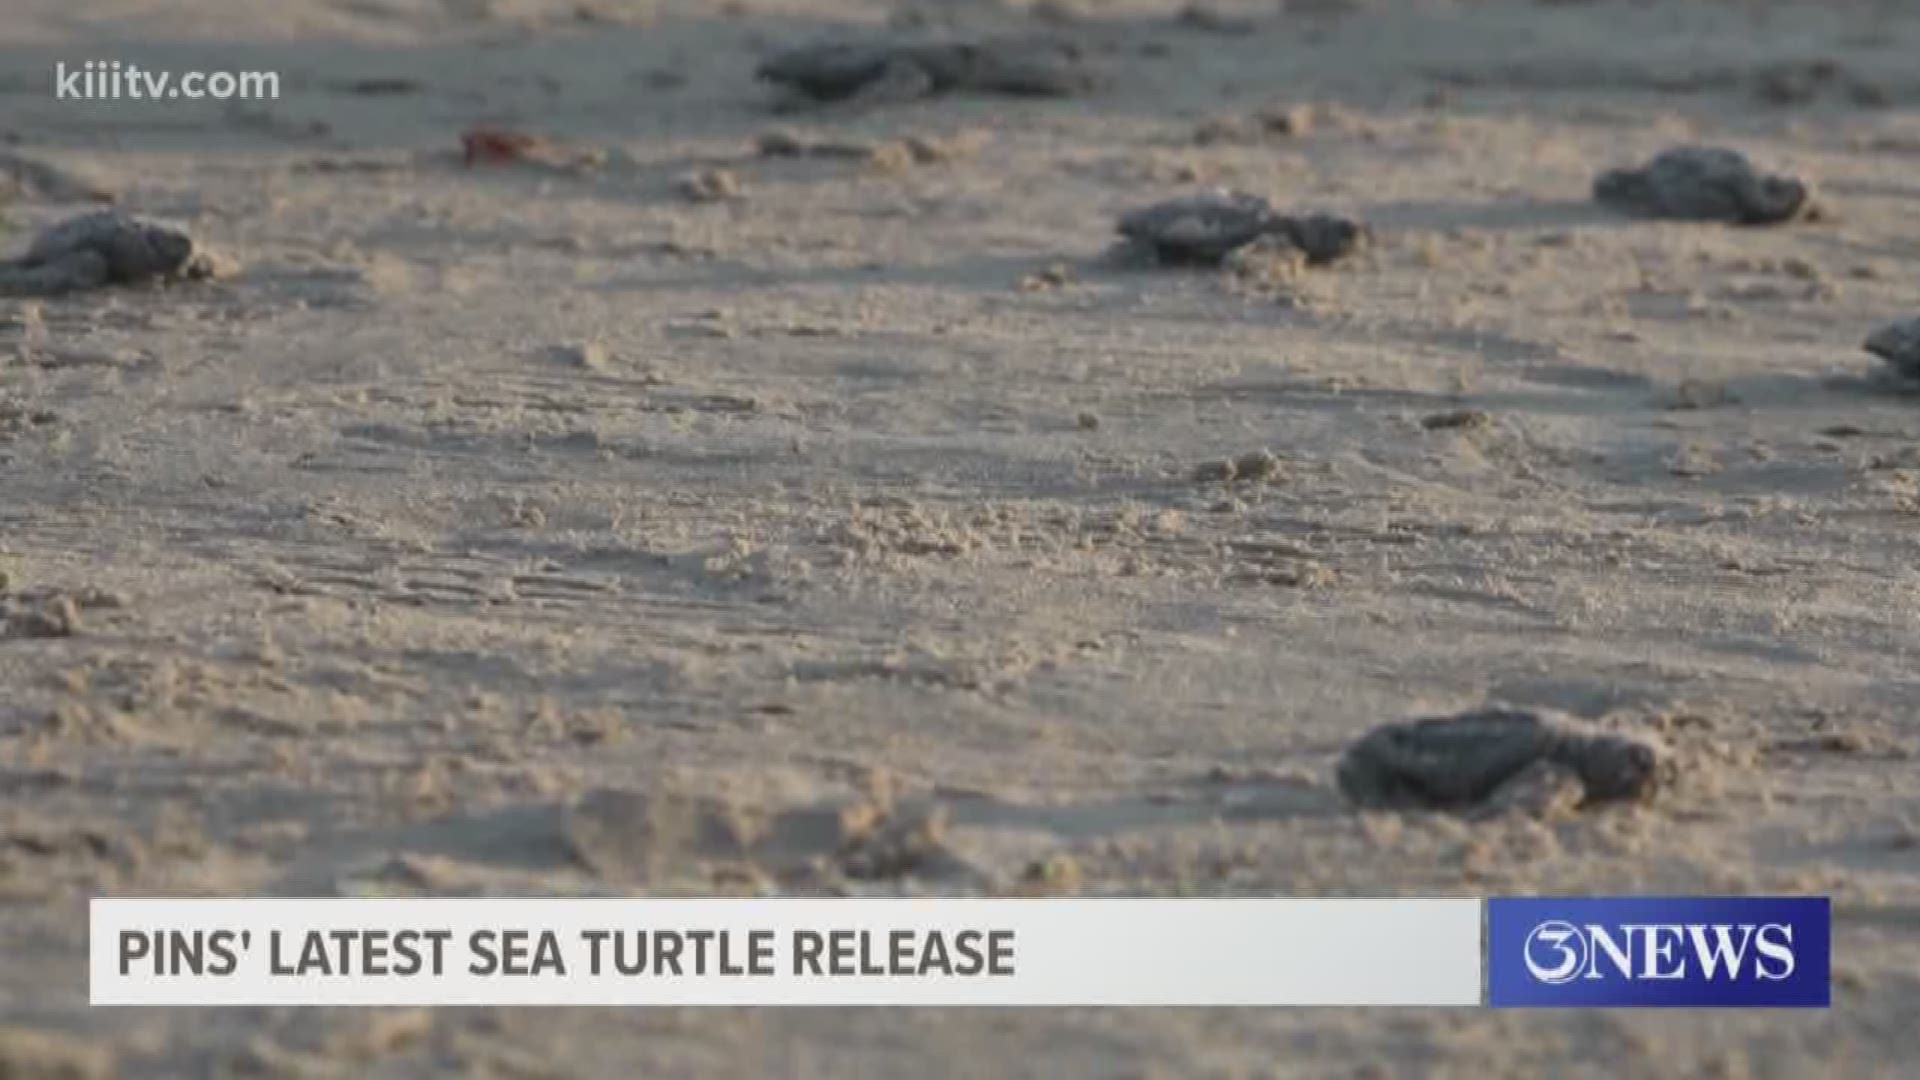 Park rangers announced last month that they were not going to have public sea turtle release events this summer because of COVID-19 concerns.